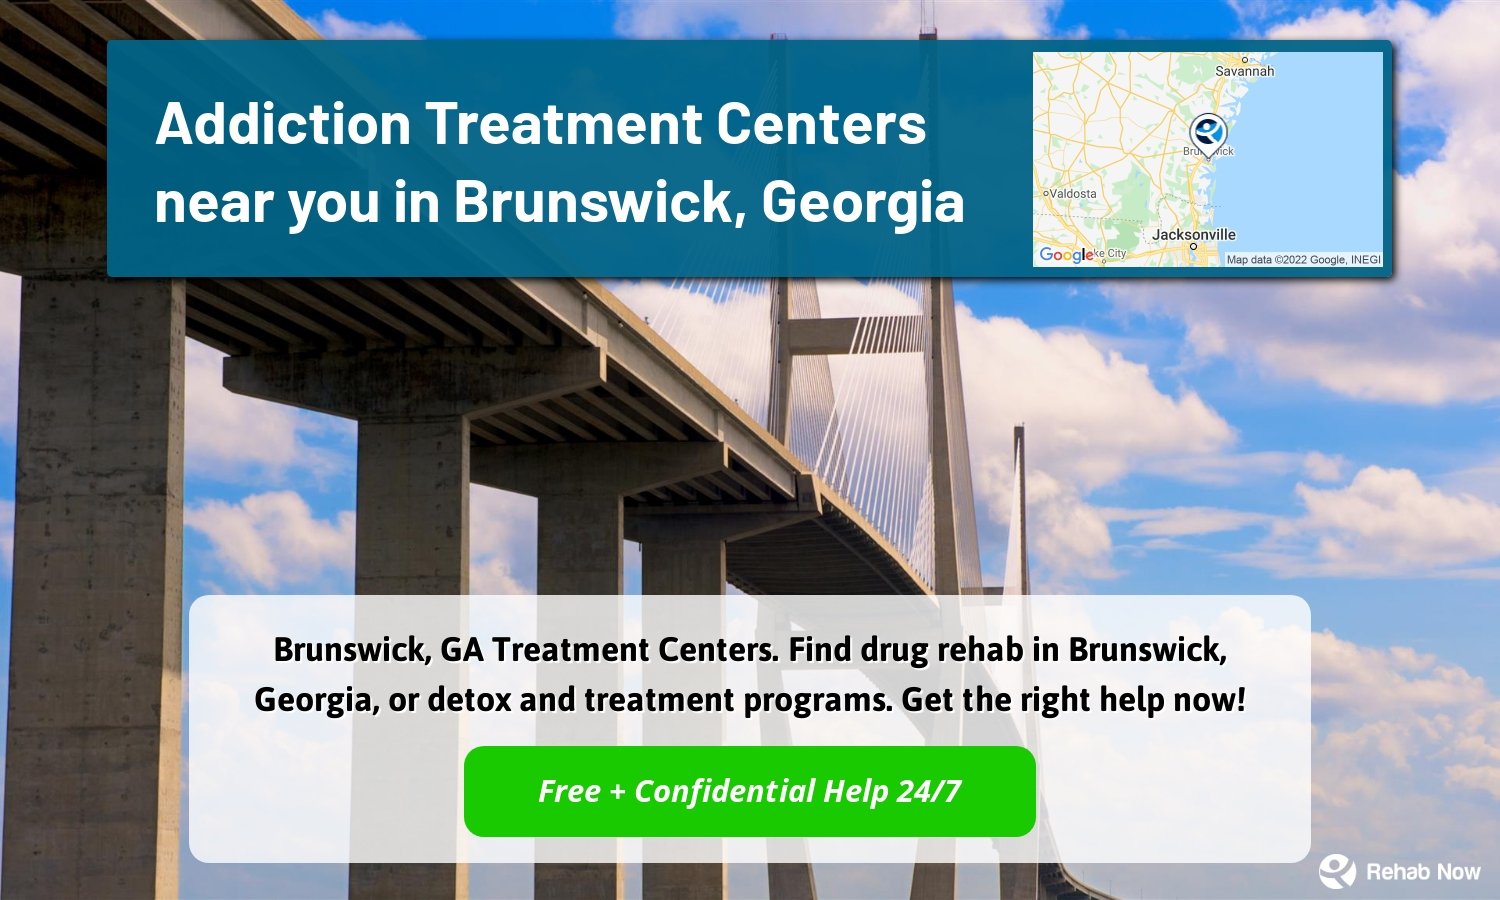 Brunswick, GA Treatment Centers. Find drug rehab in Brunswick, Georgia, or detox and treatment programs. Get the right help now!